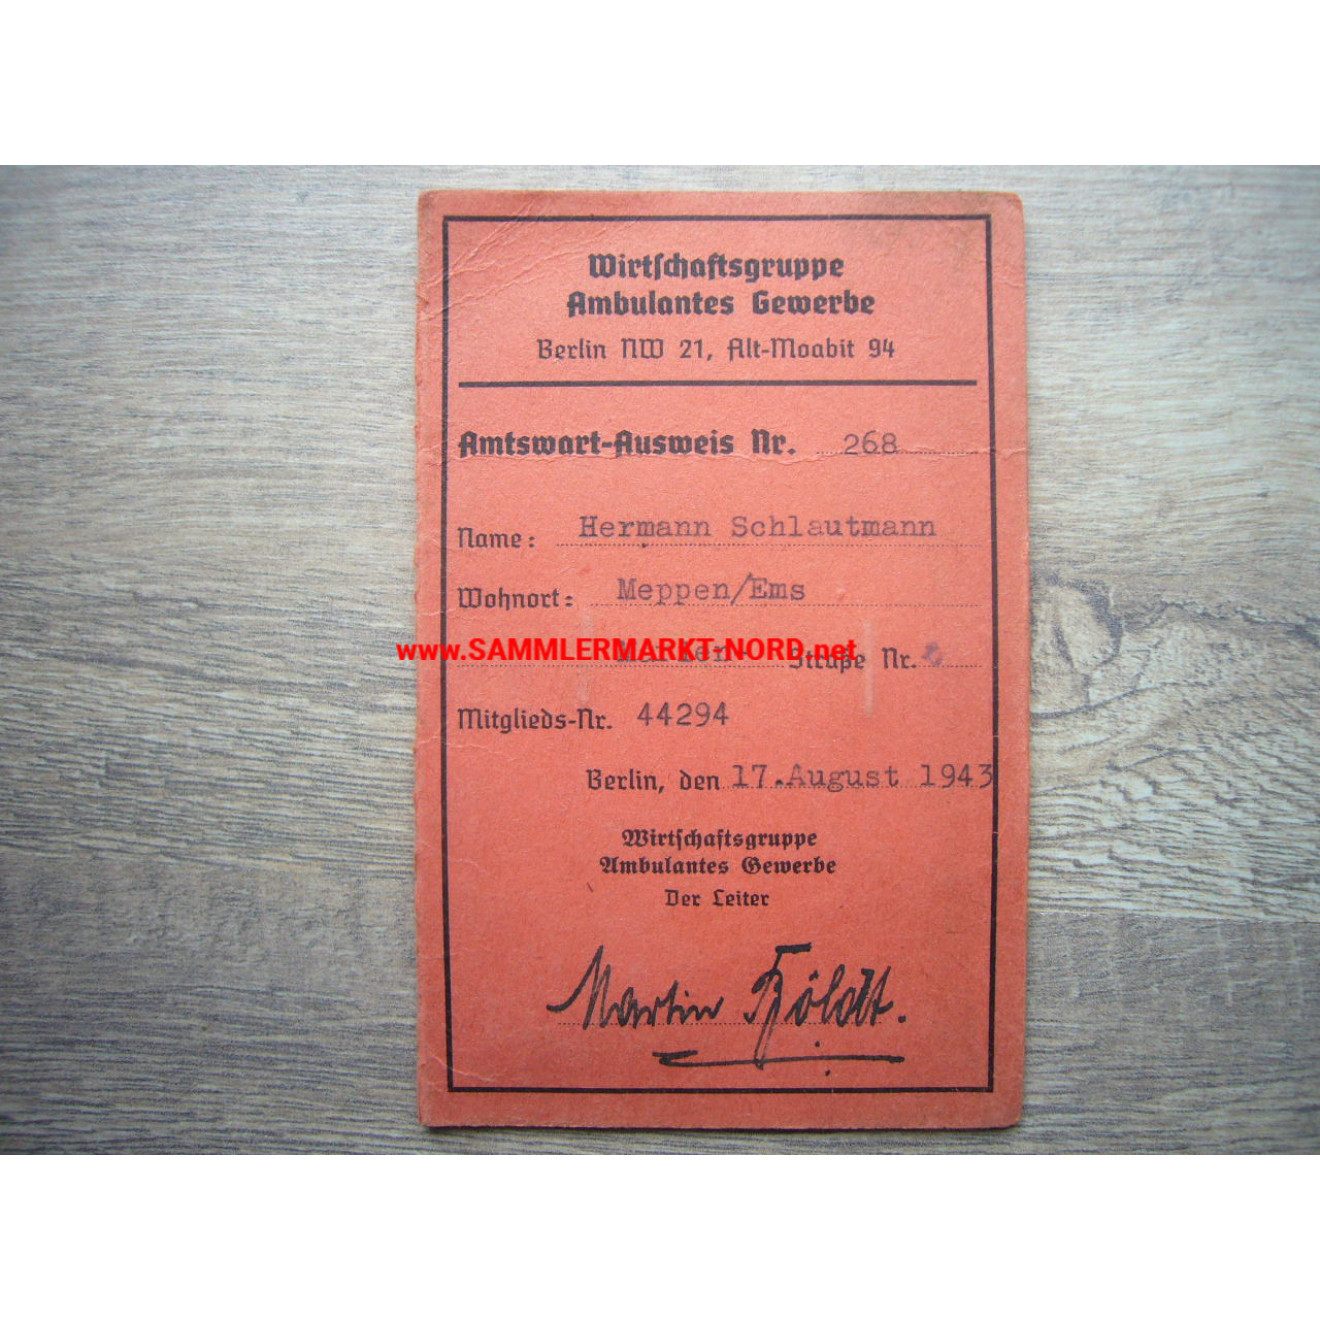 Economic group for ambulatory trade - official card